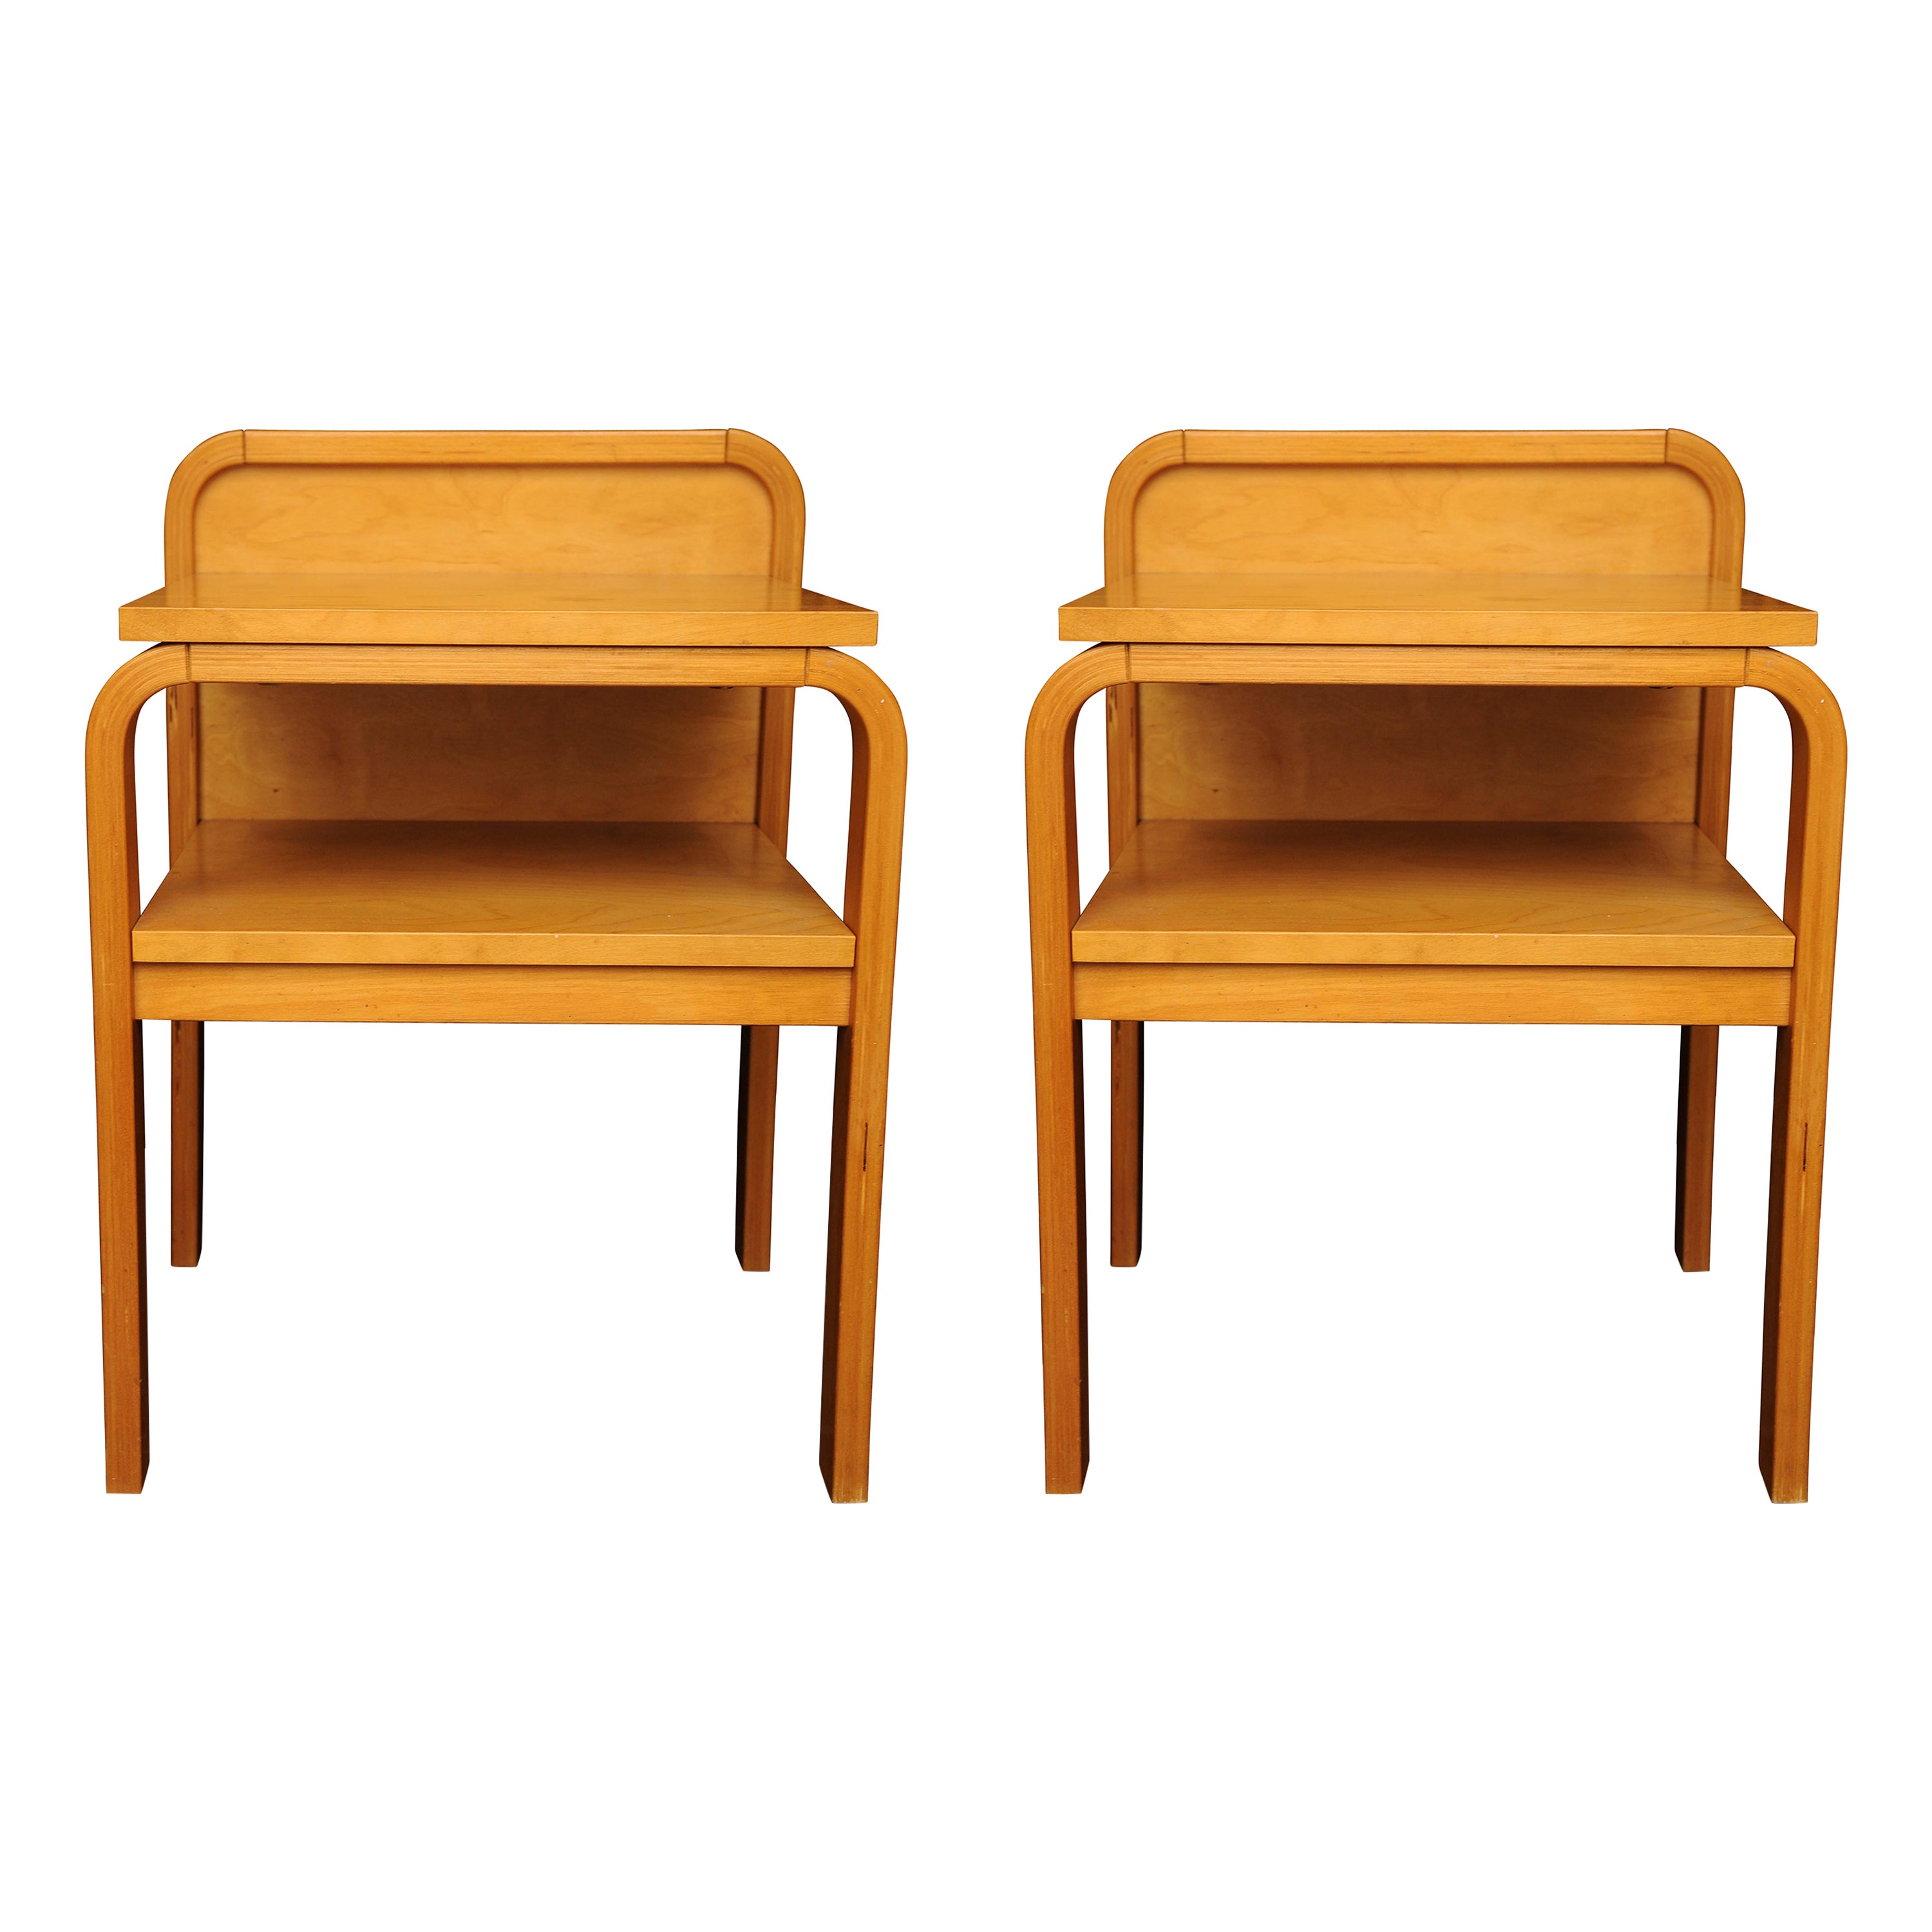 Pair Mid Century Modern Isku of Finland Bent Plywood Birch Bedside Tables, 1980s